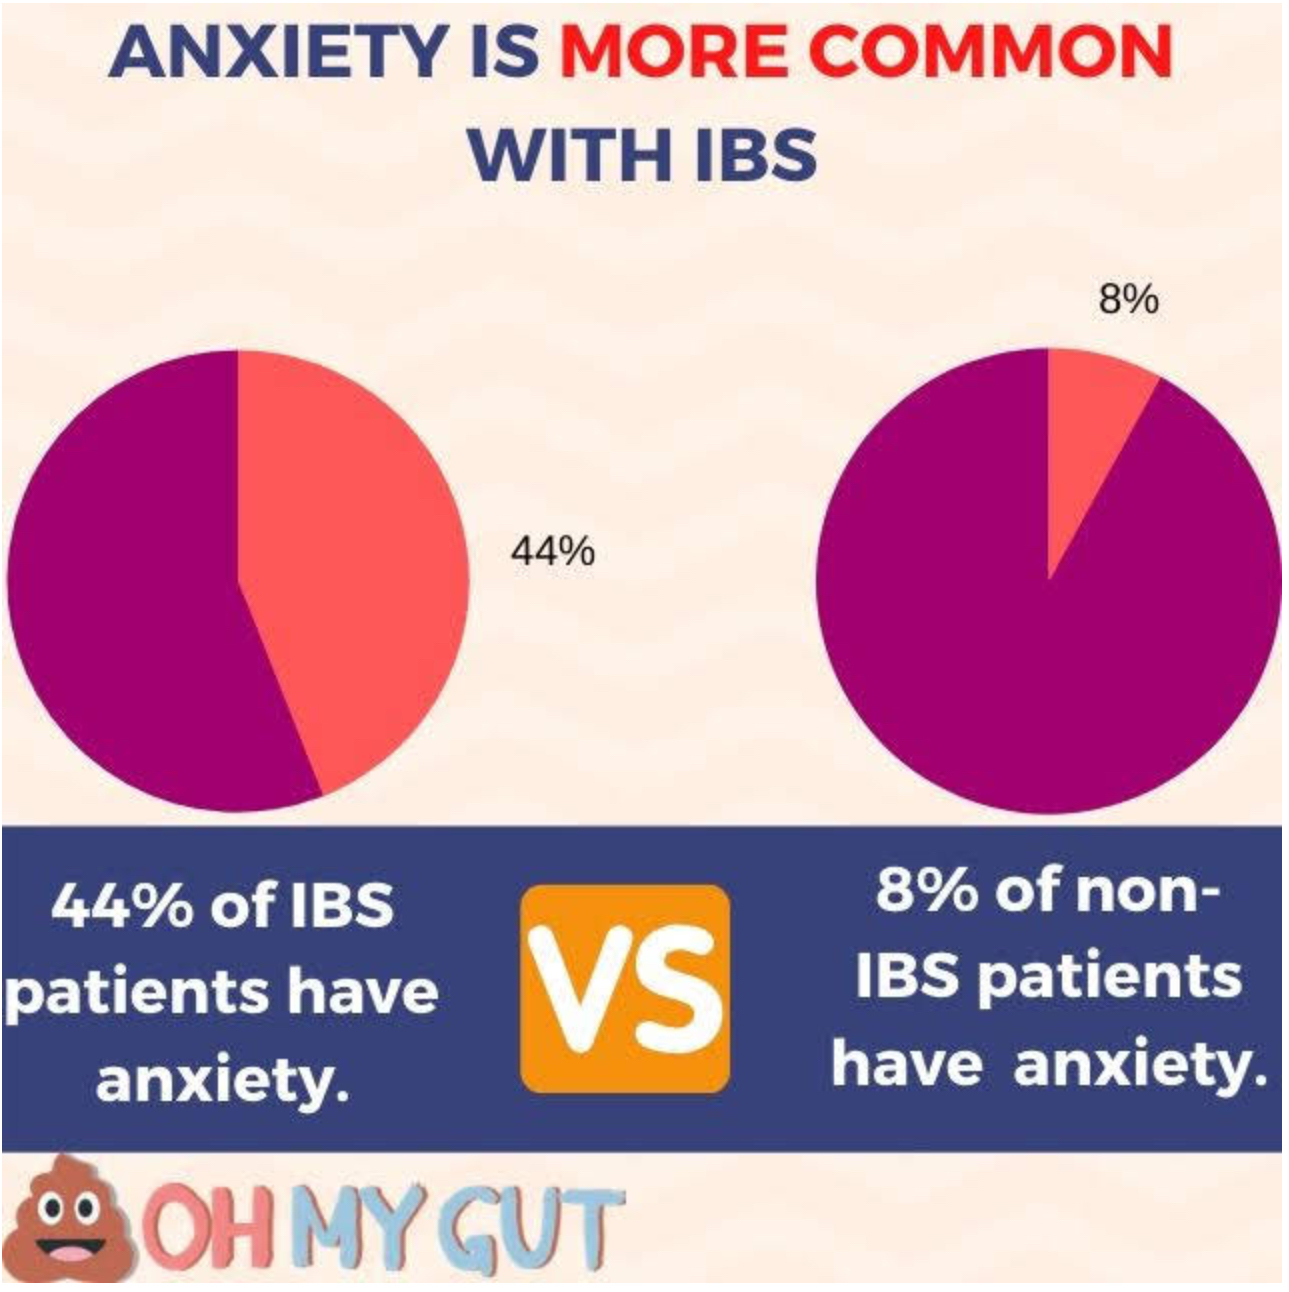 Anxiety is more common in IBS than general population